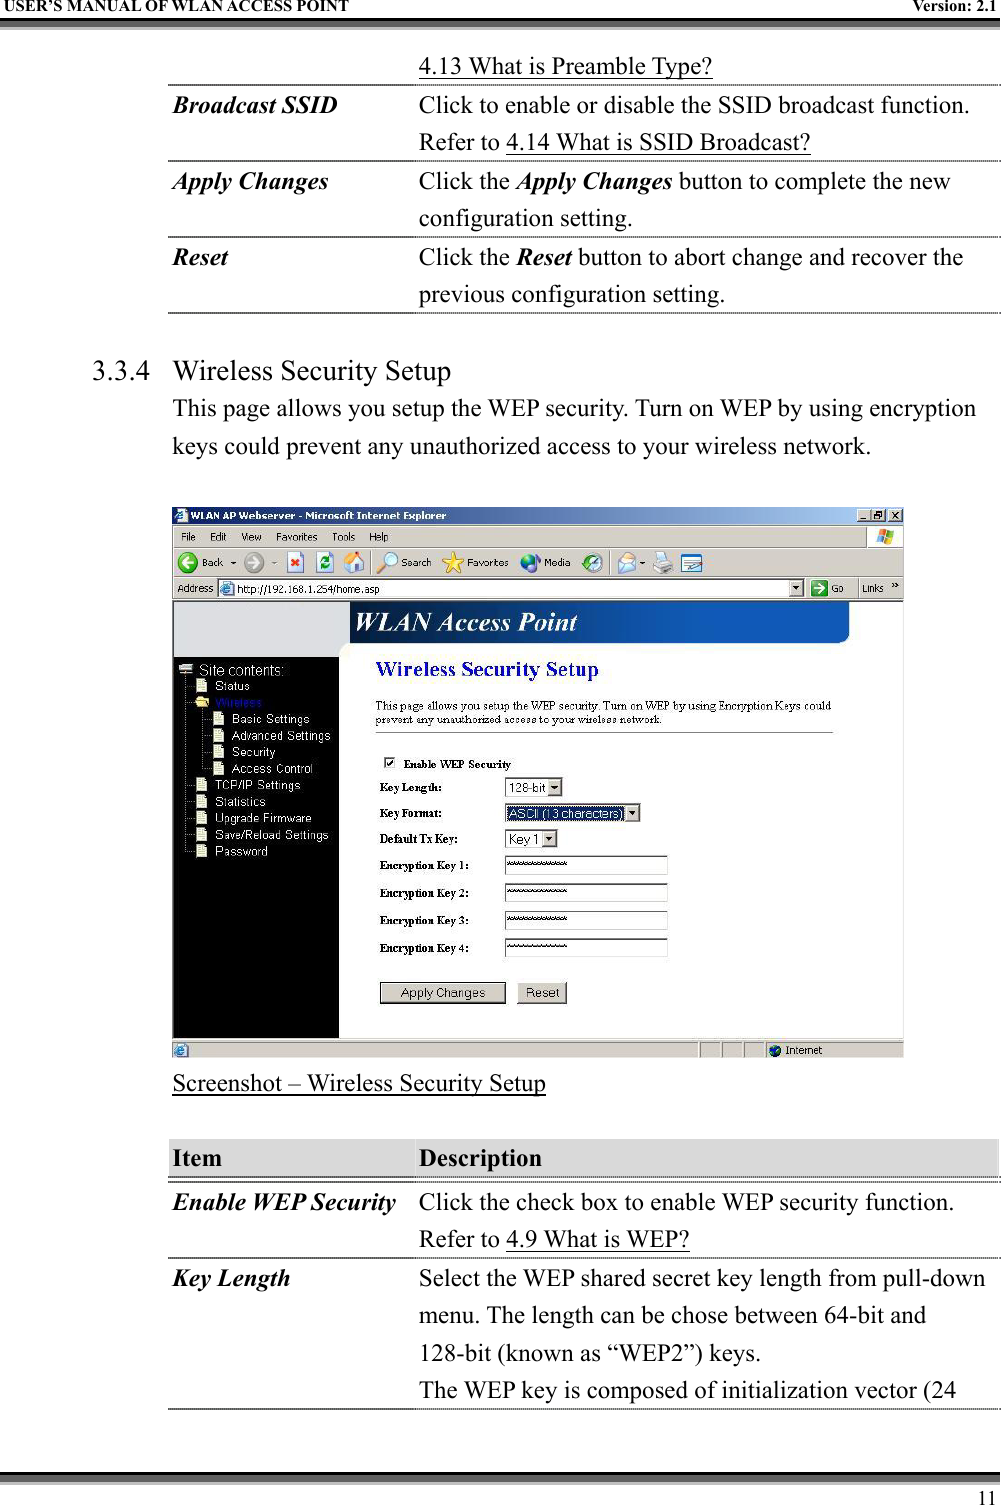   USER’S MANUAL OF WLAN ACCESS POINT    Version: 2.1     11 4.13 What is Preamble Type?  Broadcast SSID  Click to enable or disable the SSID broadcast function. Refer to 4.14 What is SSID Broadcast? Apply Changes Click the Apply Changes button to complete the new configuration setting. Reset  Click the Reset button to abort change and recover the previous configuration setting.  3.3.4  Wireless Security Setup This page allows you setup the WEP security. Turn on WEP by using encryption keys could prevent any unauthorized access to your wireless network.   Screenshot – Wireless Security Setup  Item  Description   Enable WEP Security Click the check box to enable WEP security function. Refer to 4.9 What is WEP? Key Length Select the WEP shared secret key length from pull-down menu. The length can be chose between 64-bit and 128-bit (known as “WEP2”) keys.   The WEP key is composed of initialization vector (24 